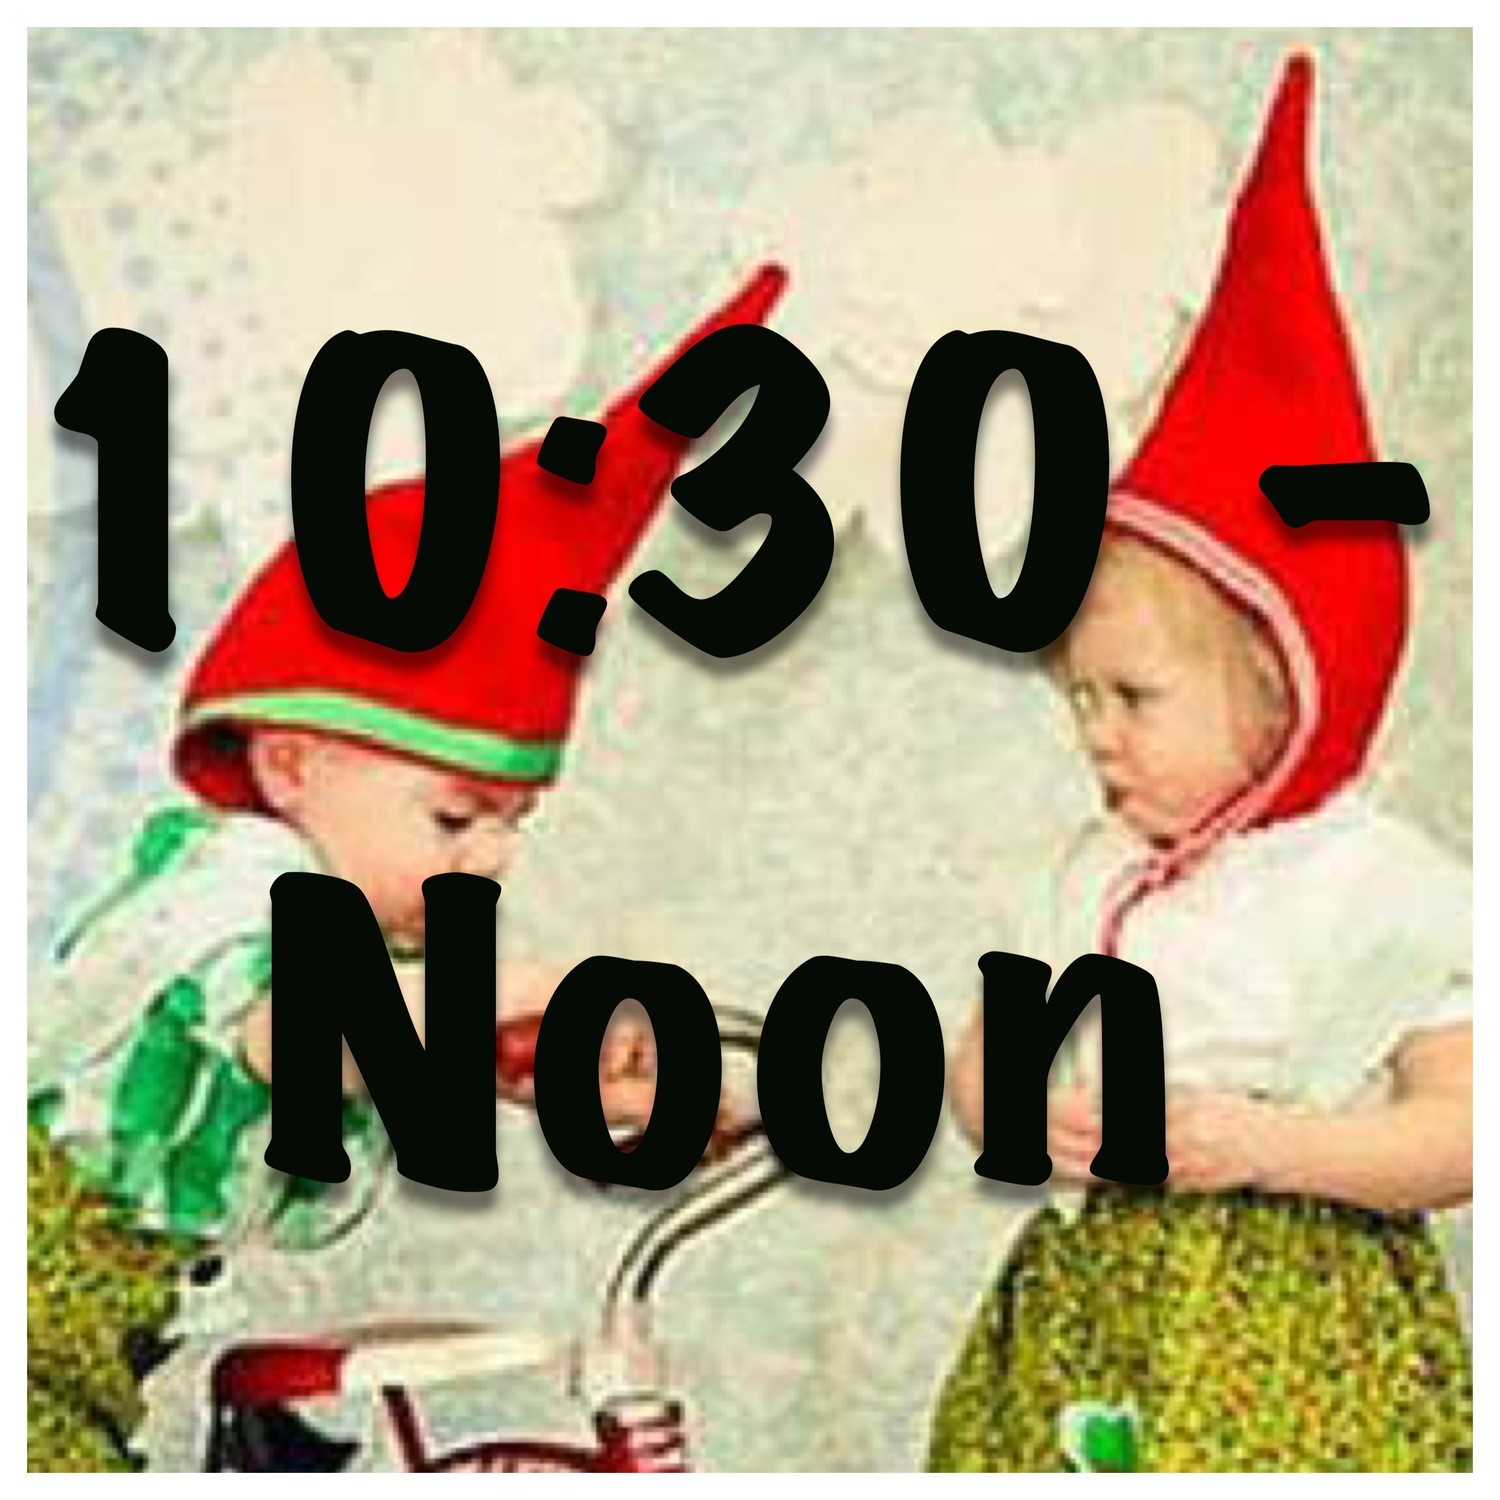 Little Gnomes Entrance Tickets 10:30am - noon